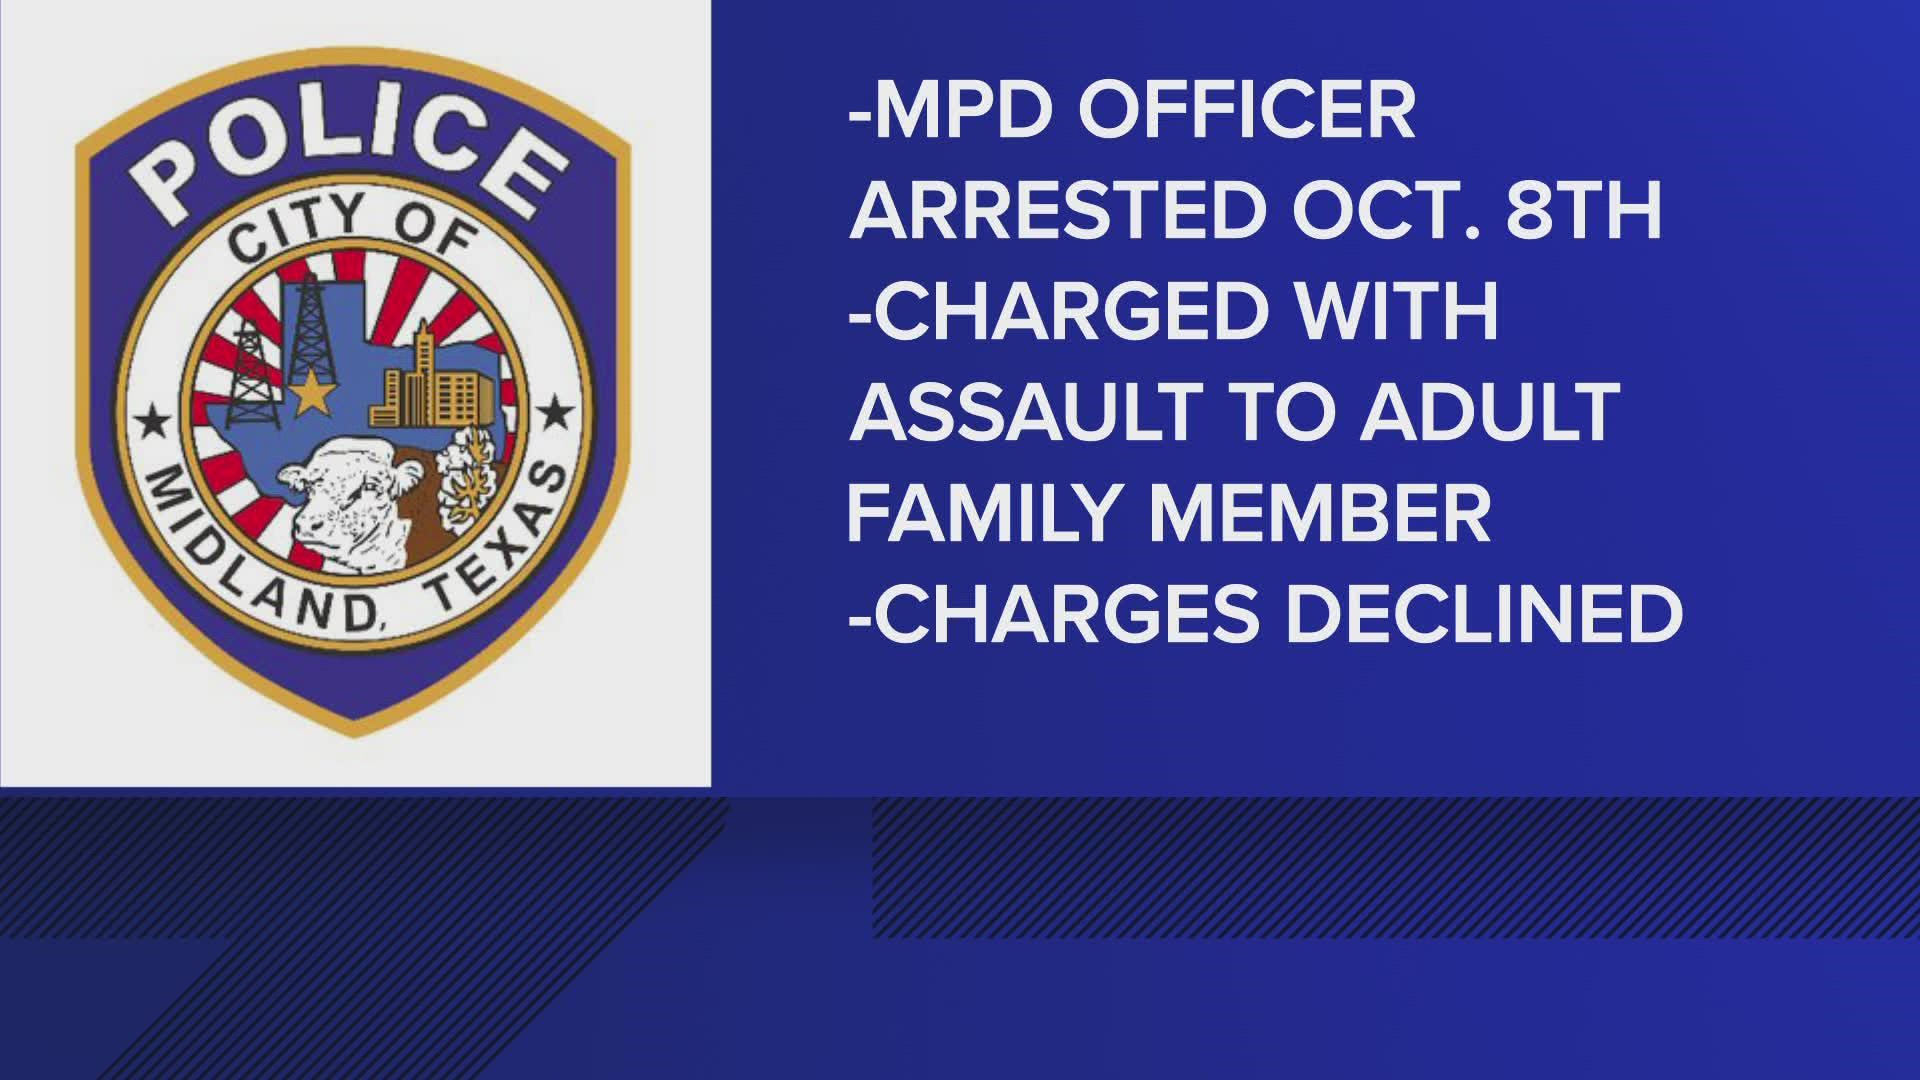 The officer was initially arrested for assault family violence against an adult family member.